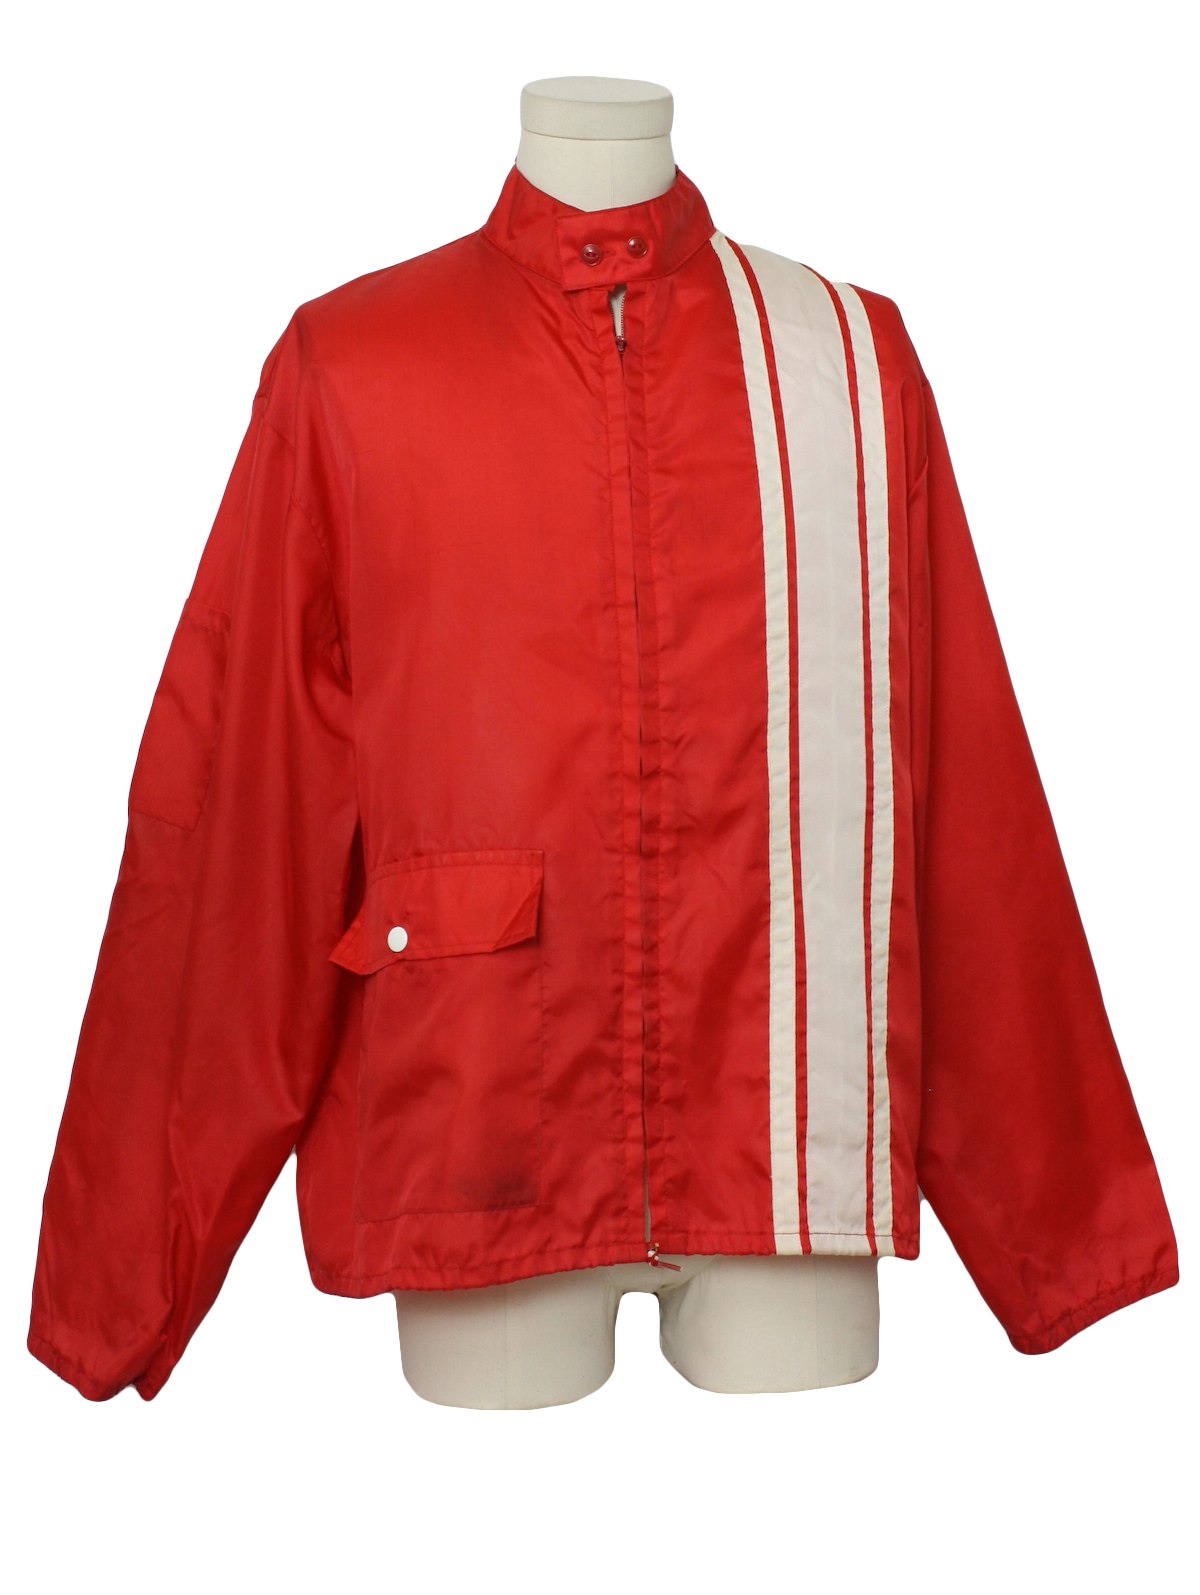 Vintage 1970s Jacket: 70s -no label- Mens red and white nylon ...